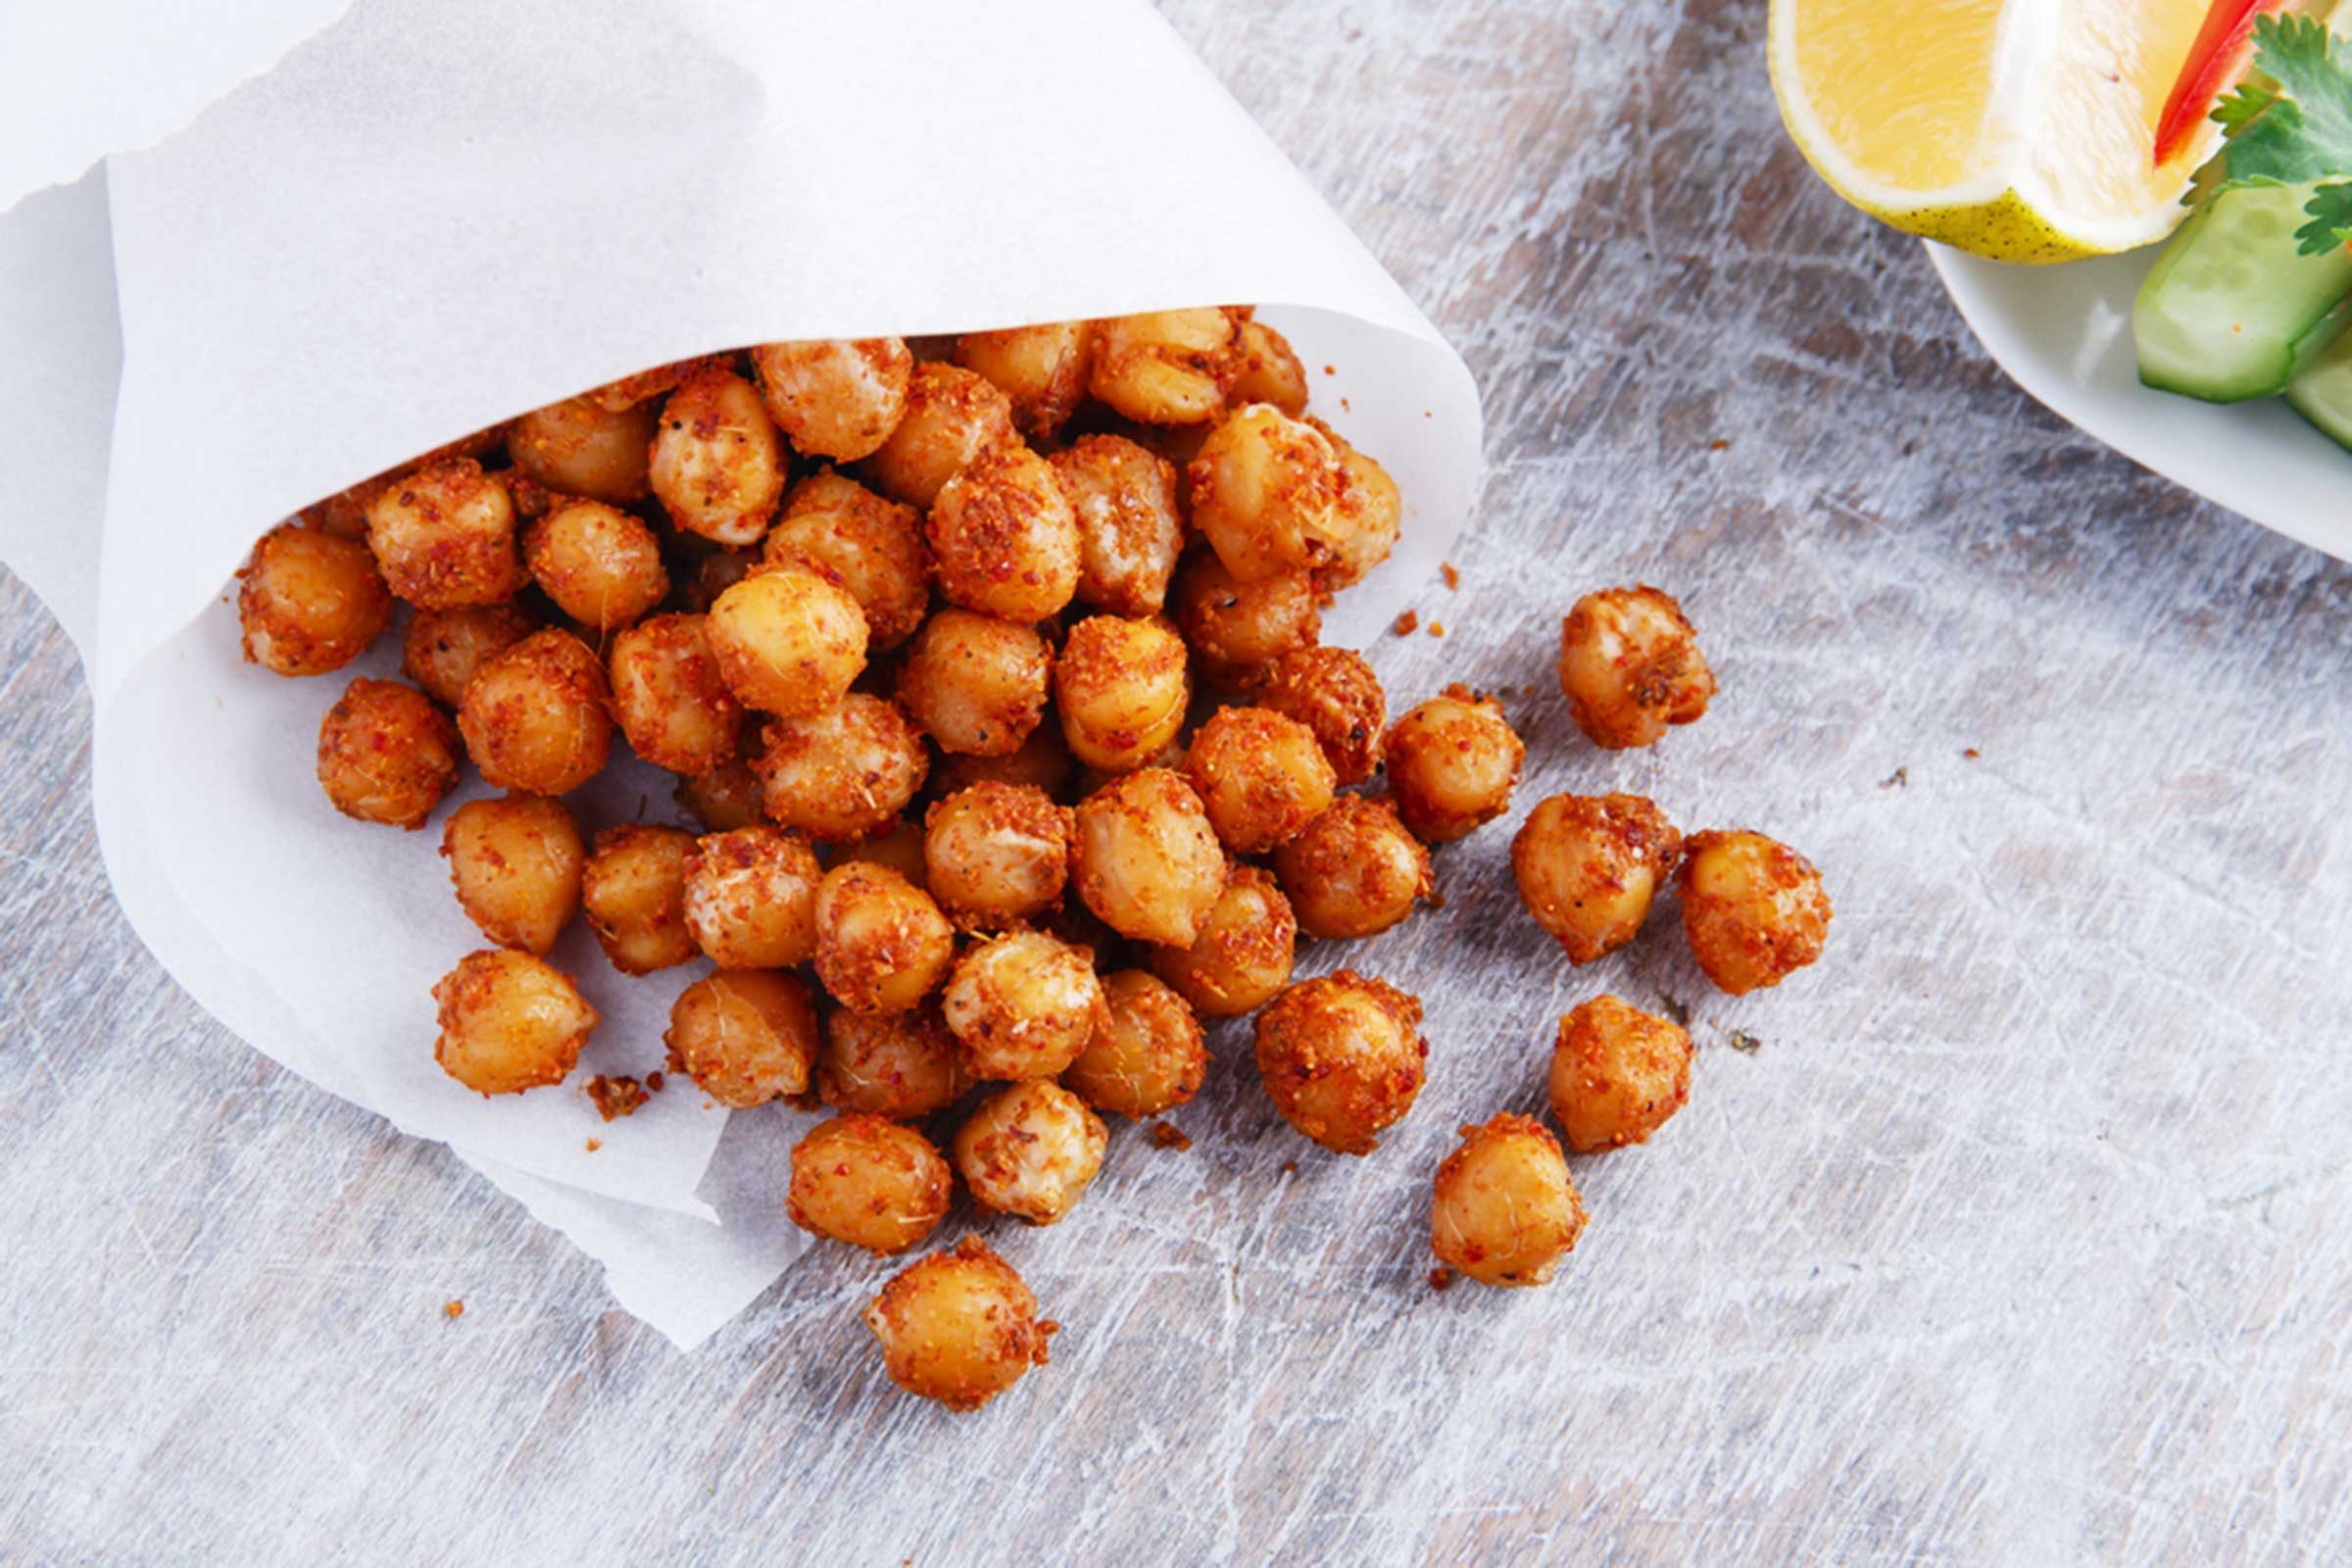 More Chickpeas, Please! 3 Surprising Foods That Boost Sex Drive